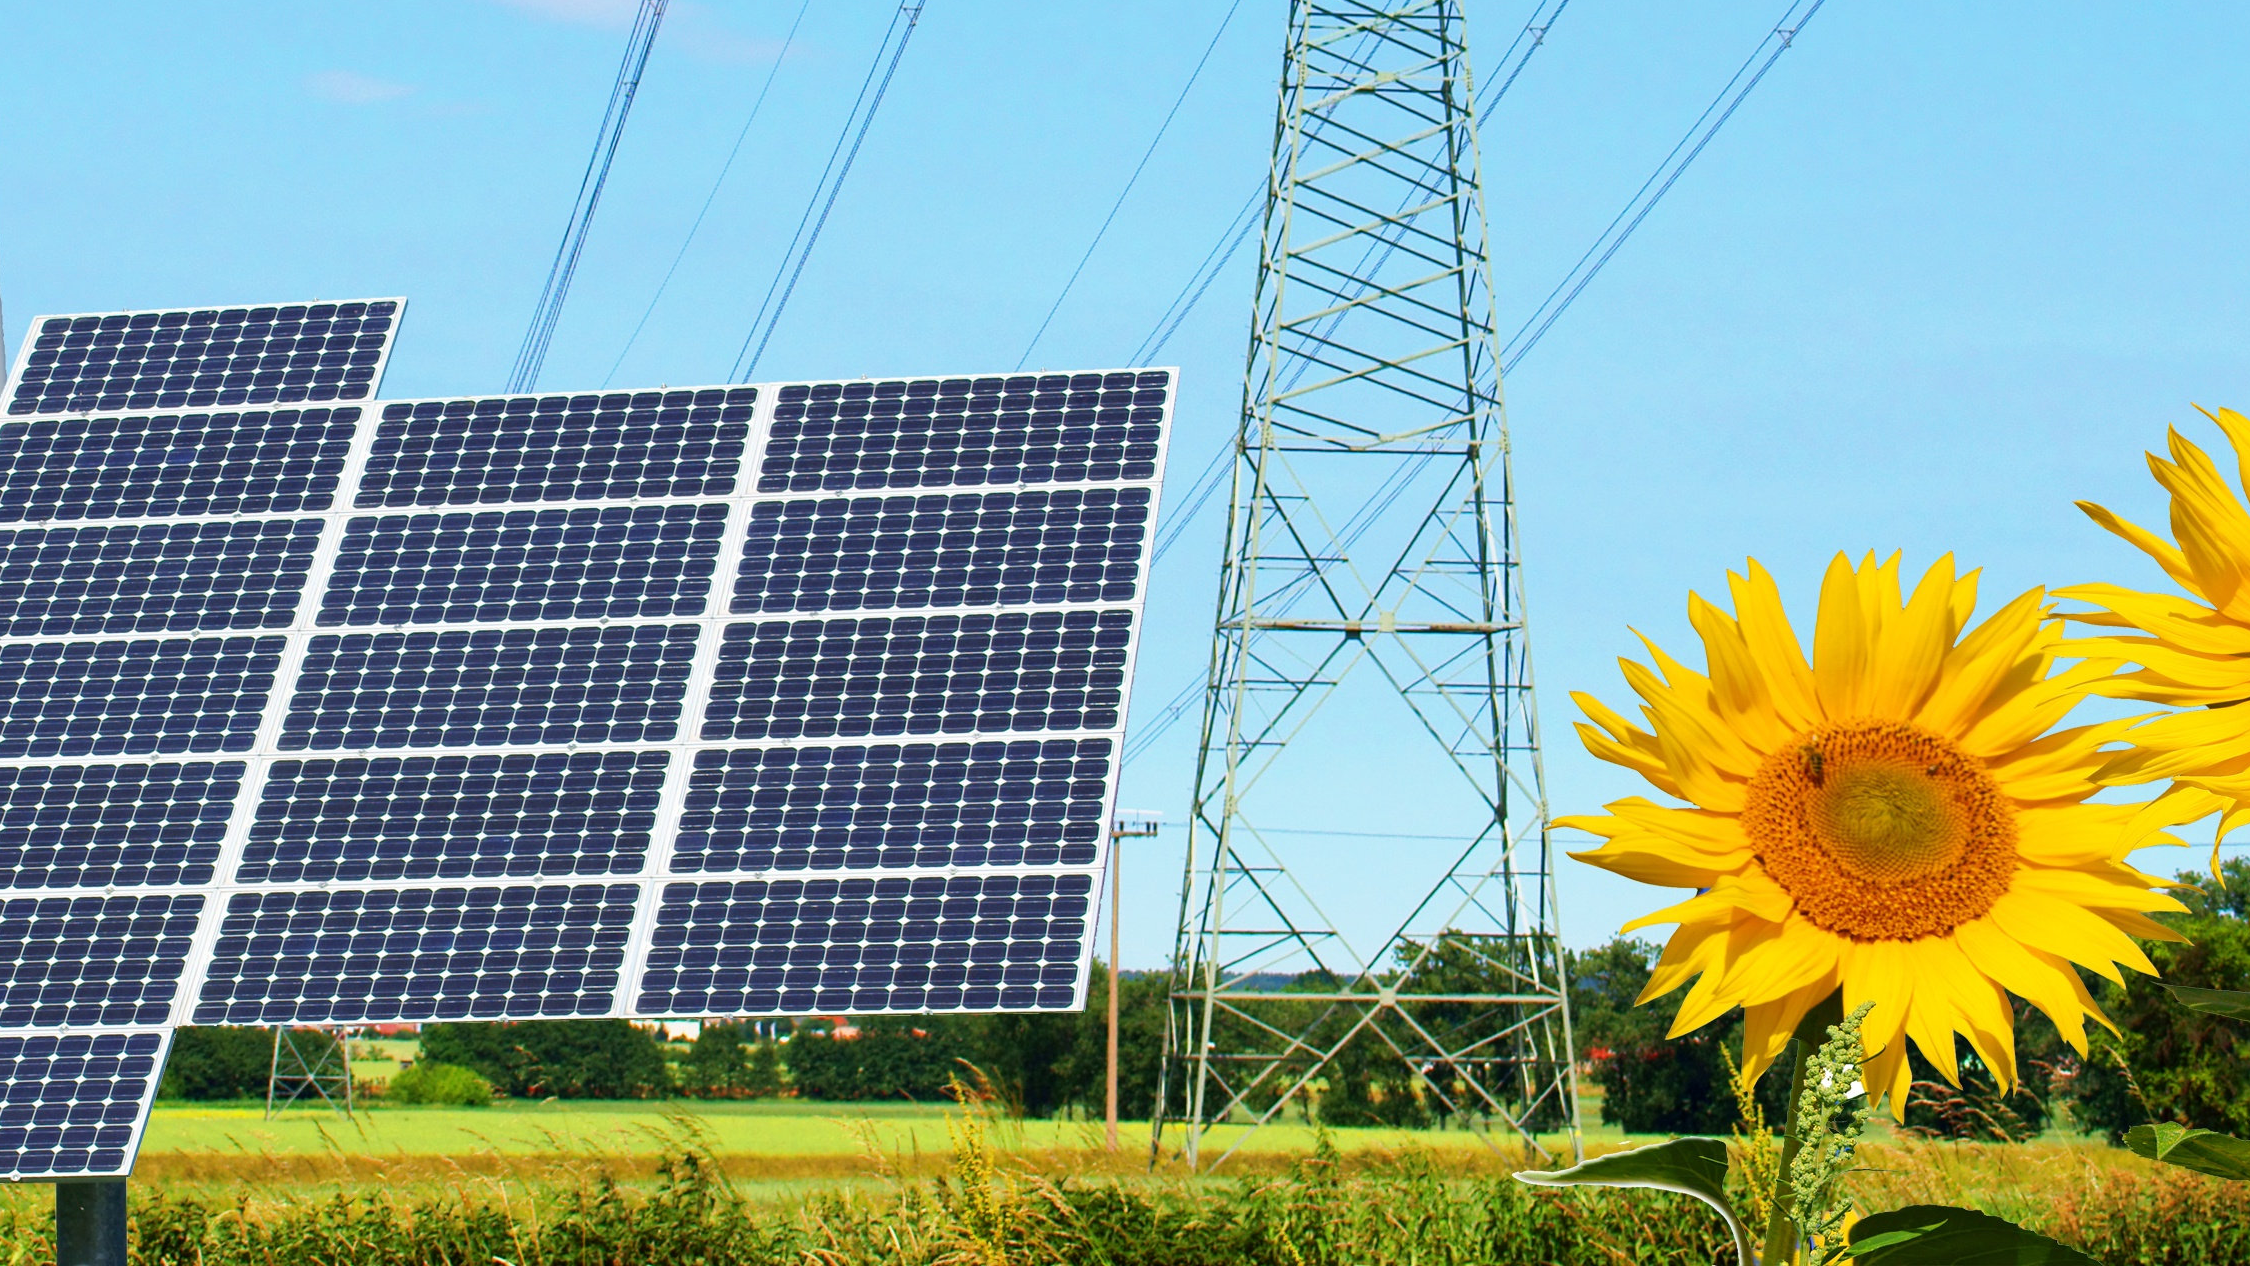 Solar panels, transmission lines and sunflowers